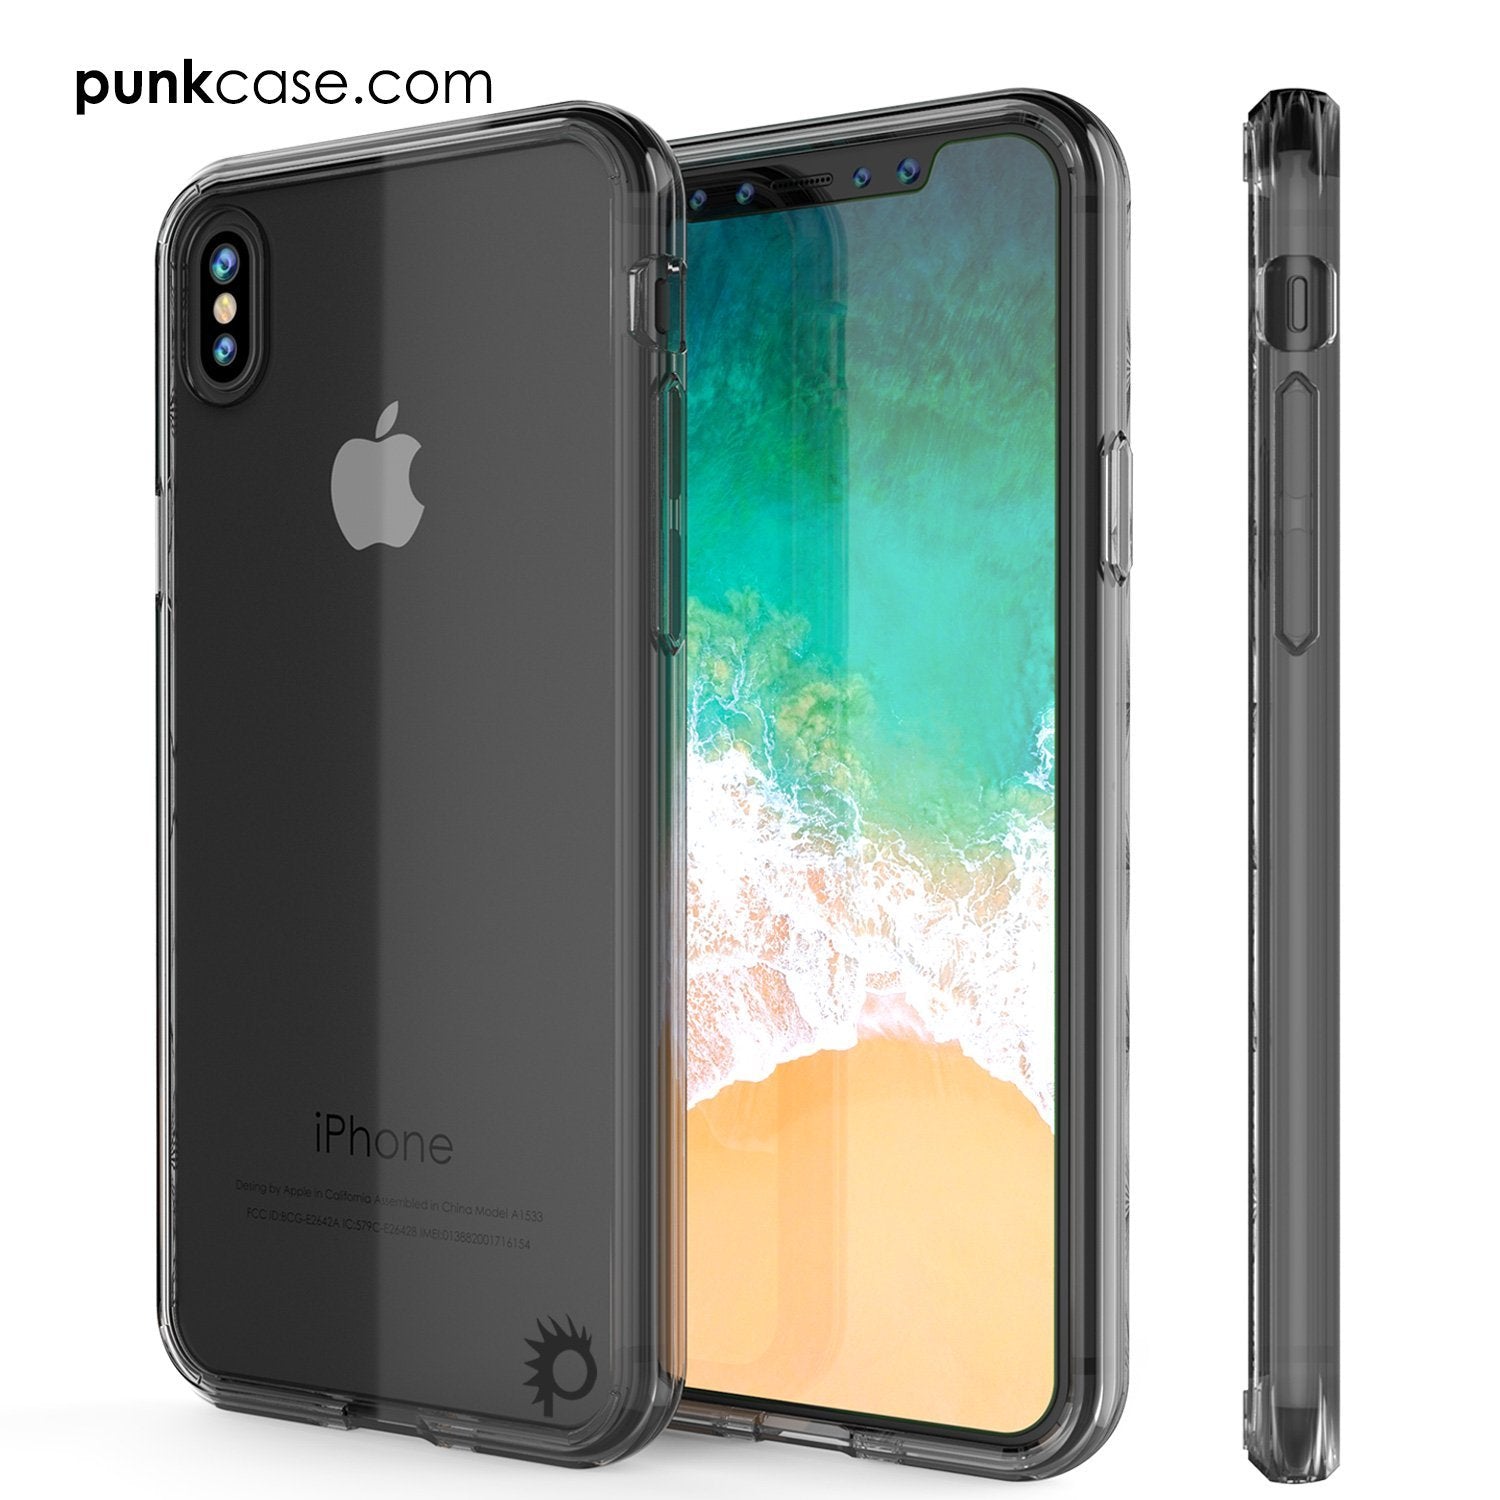 Punkcase iPhone XR Case With Tempered Glass Screen Protector, Holster –  punkcase